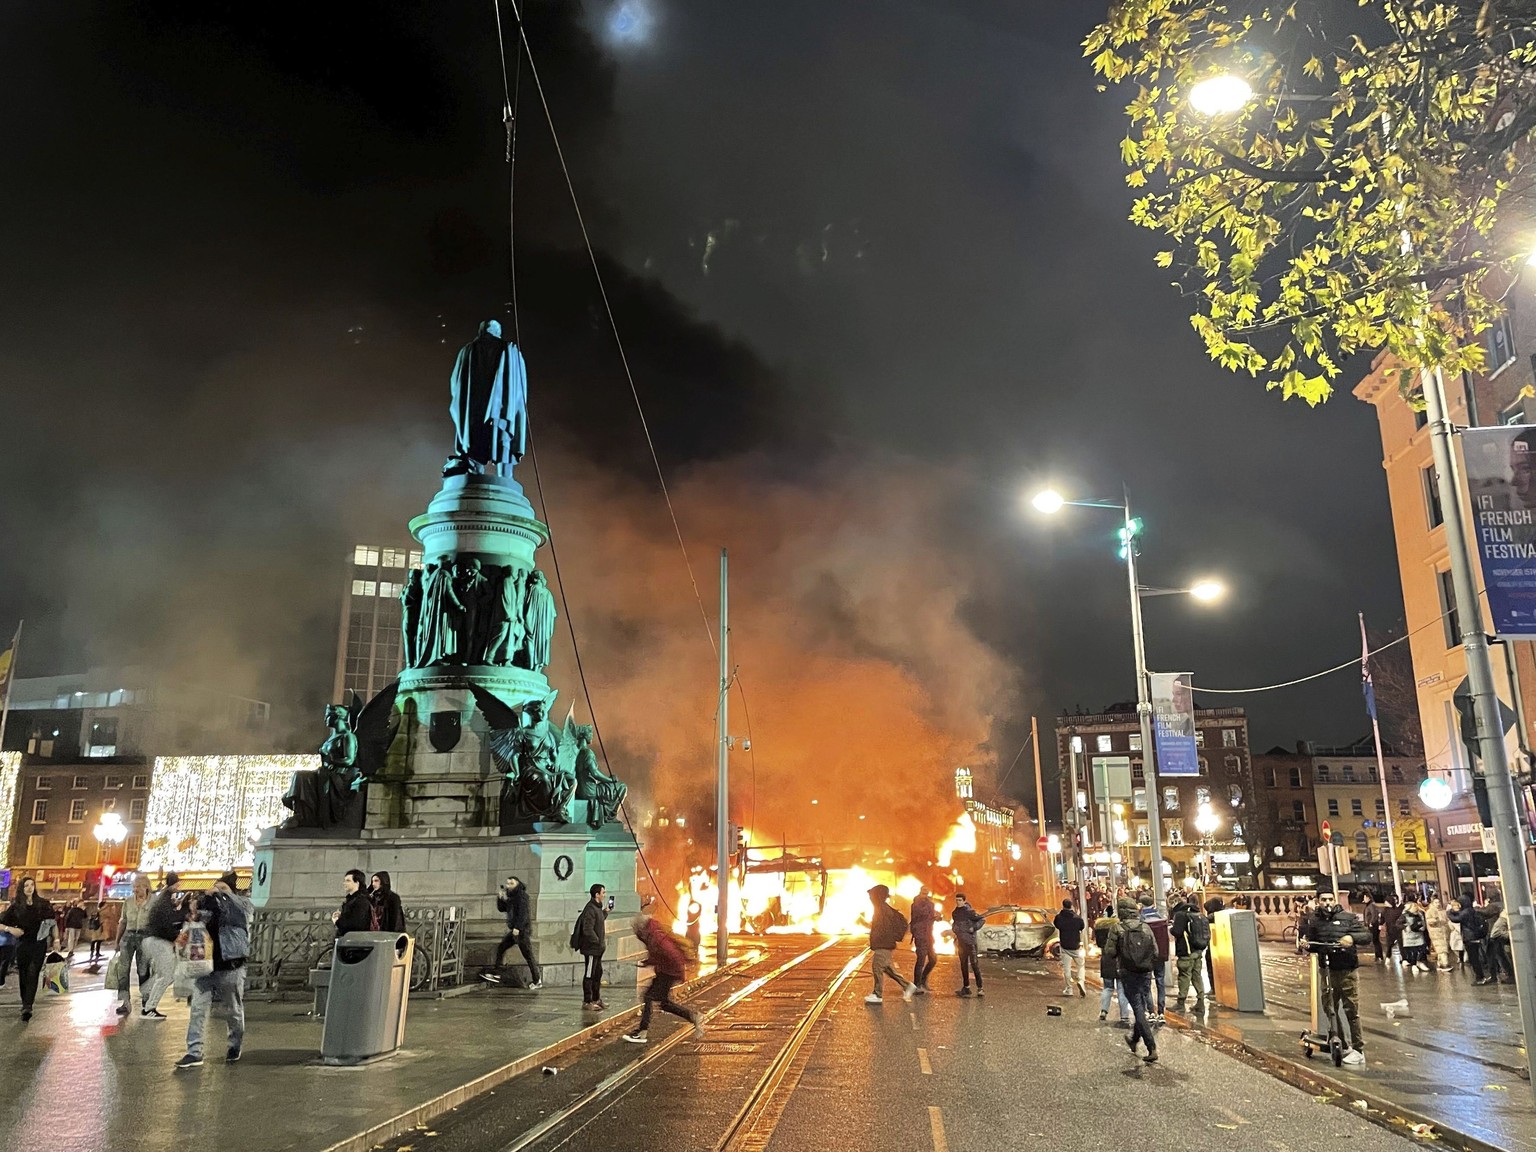 A bus and car on fire after violent scenes unfolded in Dublin city center, Thursday Nov. 23, 2023 following a knife attack. A 5-year-old girl is receiving emergency medical treatment in a Dublin hospi ...